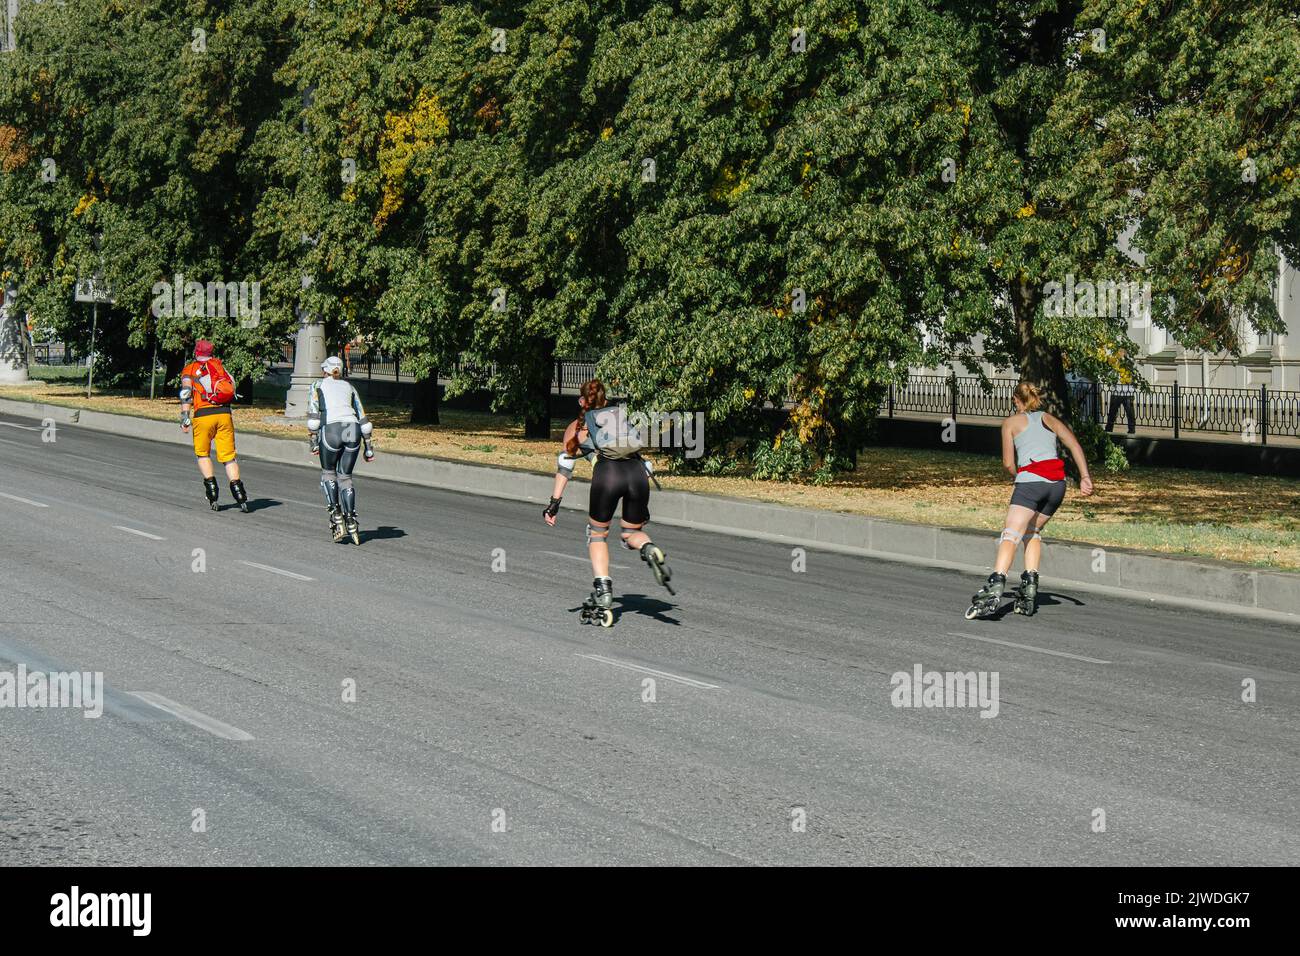 Ekaterinburg, Russia - August 7, 2022: man and women rollerblading on city street Stock Photo